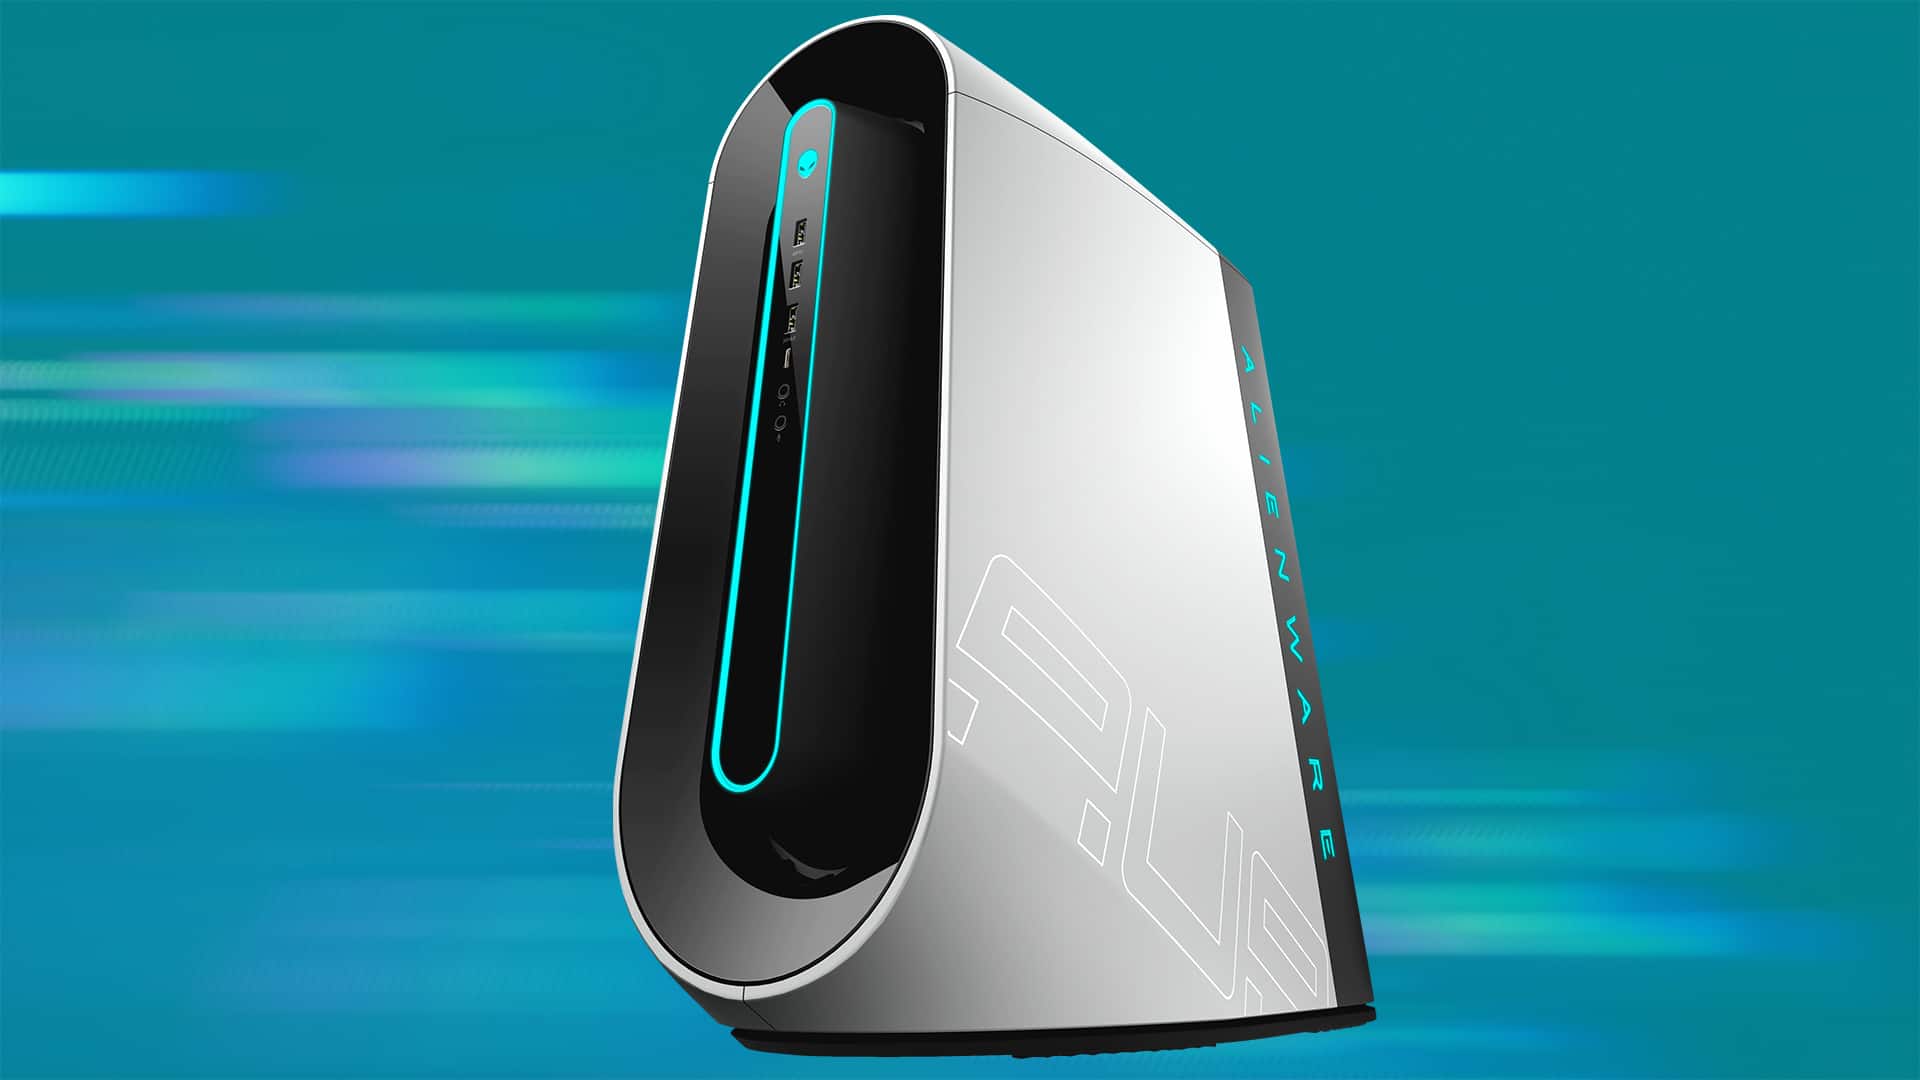 Alienware Aurora R11: One of the Top Pre-Built Gaming PCs on the